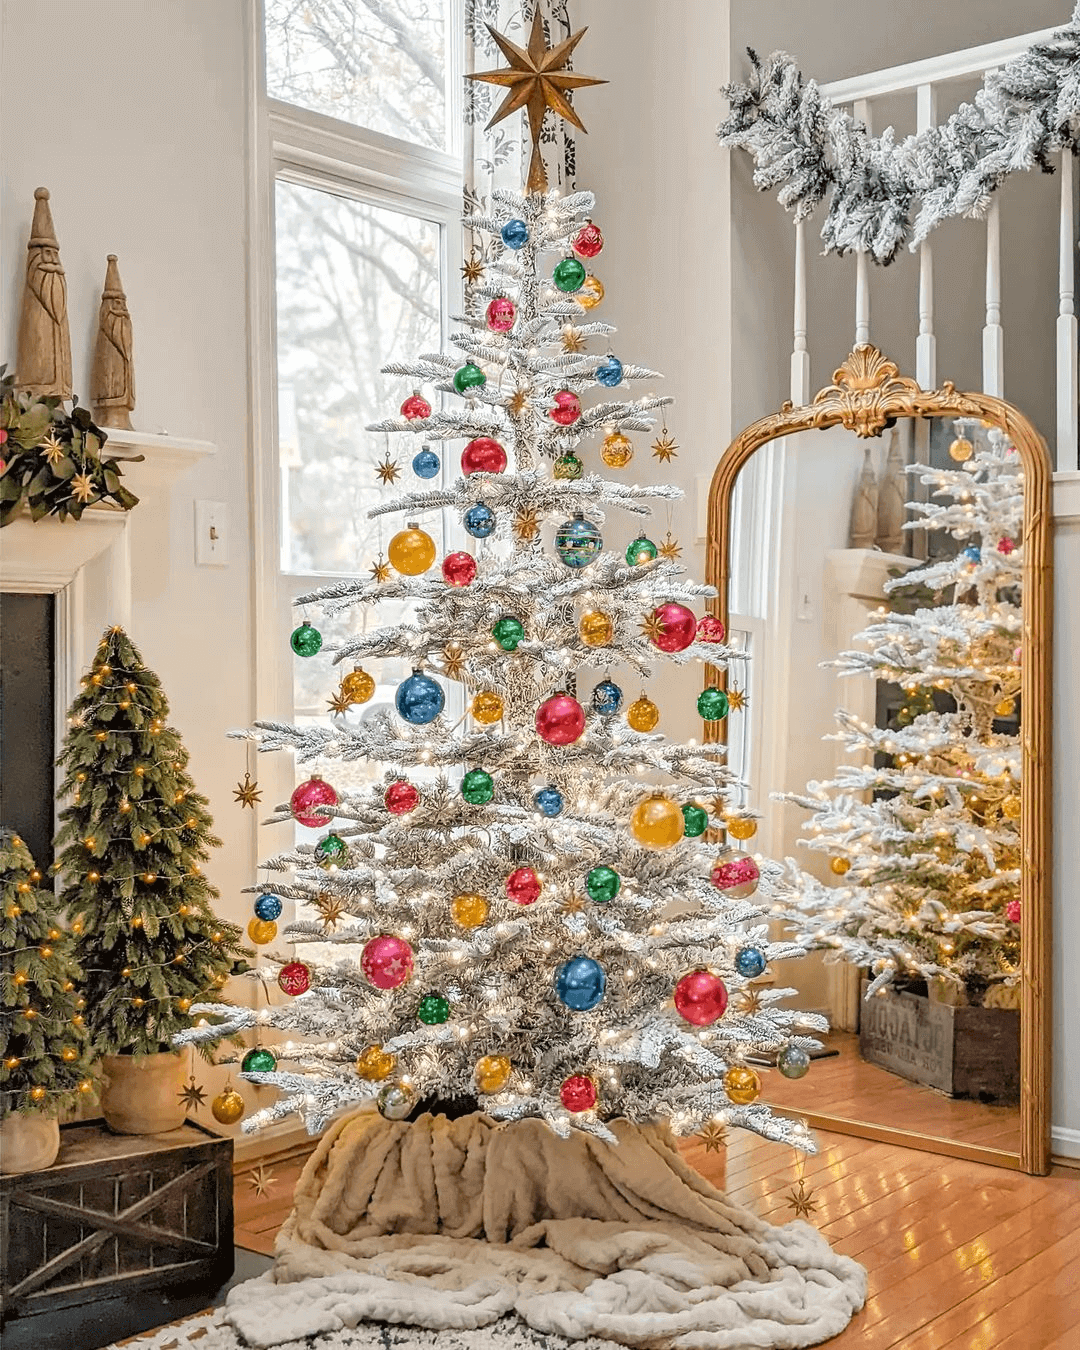 King of Christmas 8' King Noble Flock Artificial Christmas Tree with 600 Warm White LED Lights